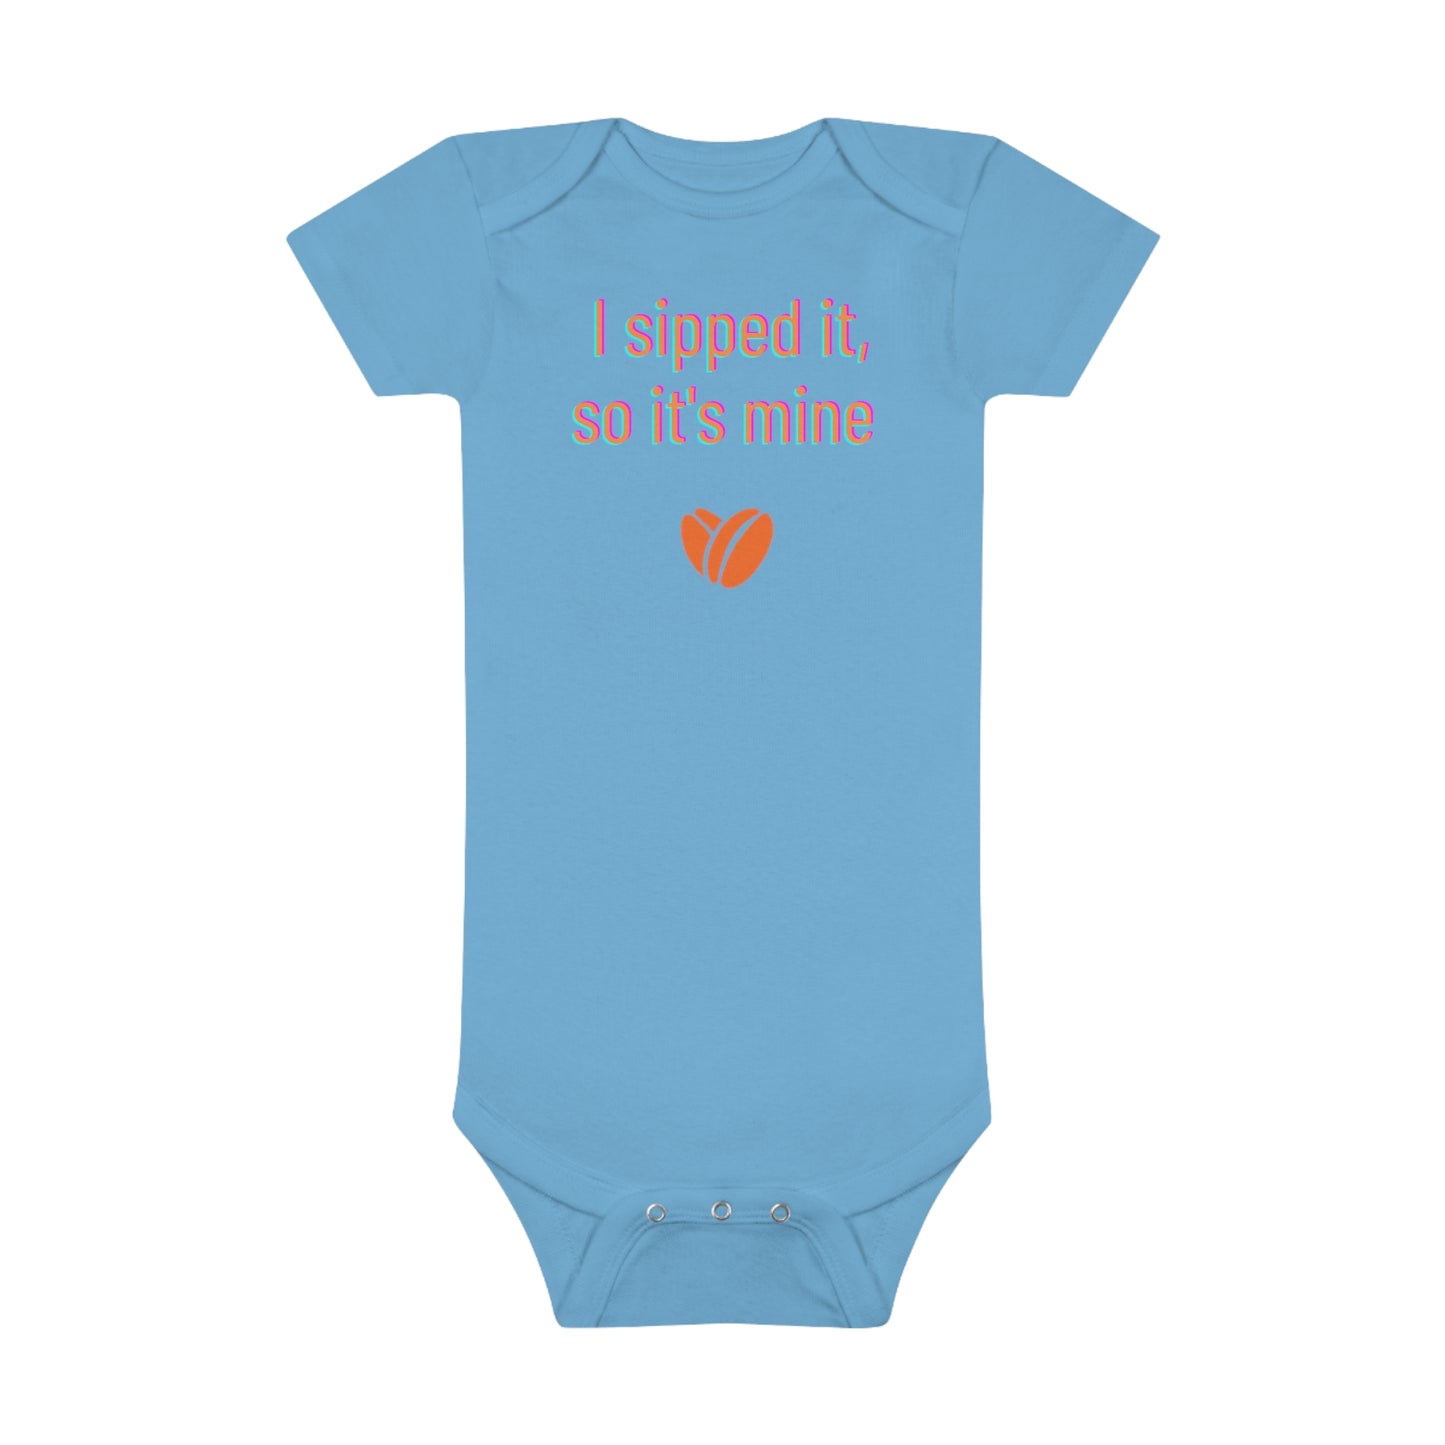 I Sipped It So It's Mine, Baby Short Sleeve Onesie®